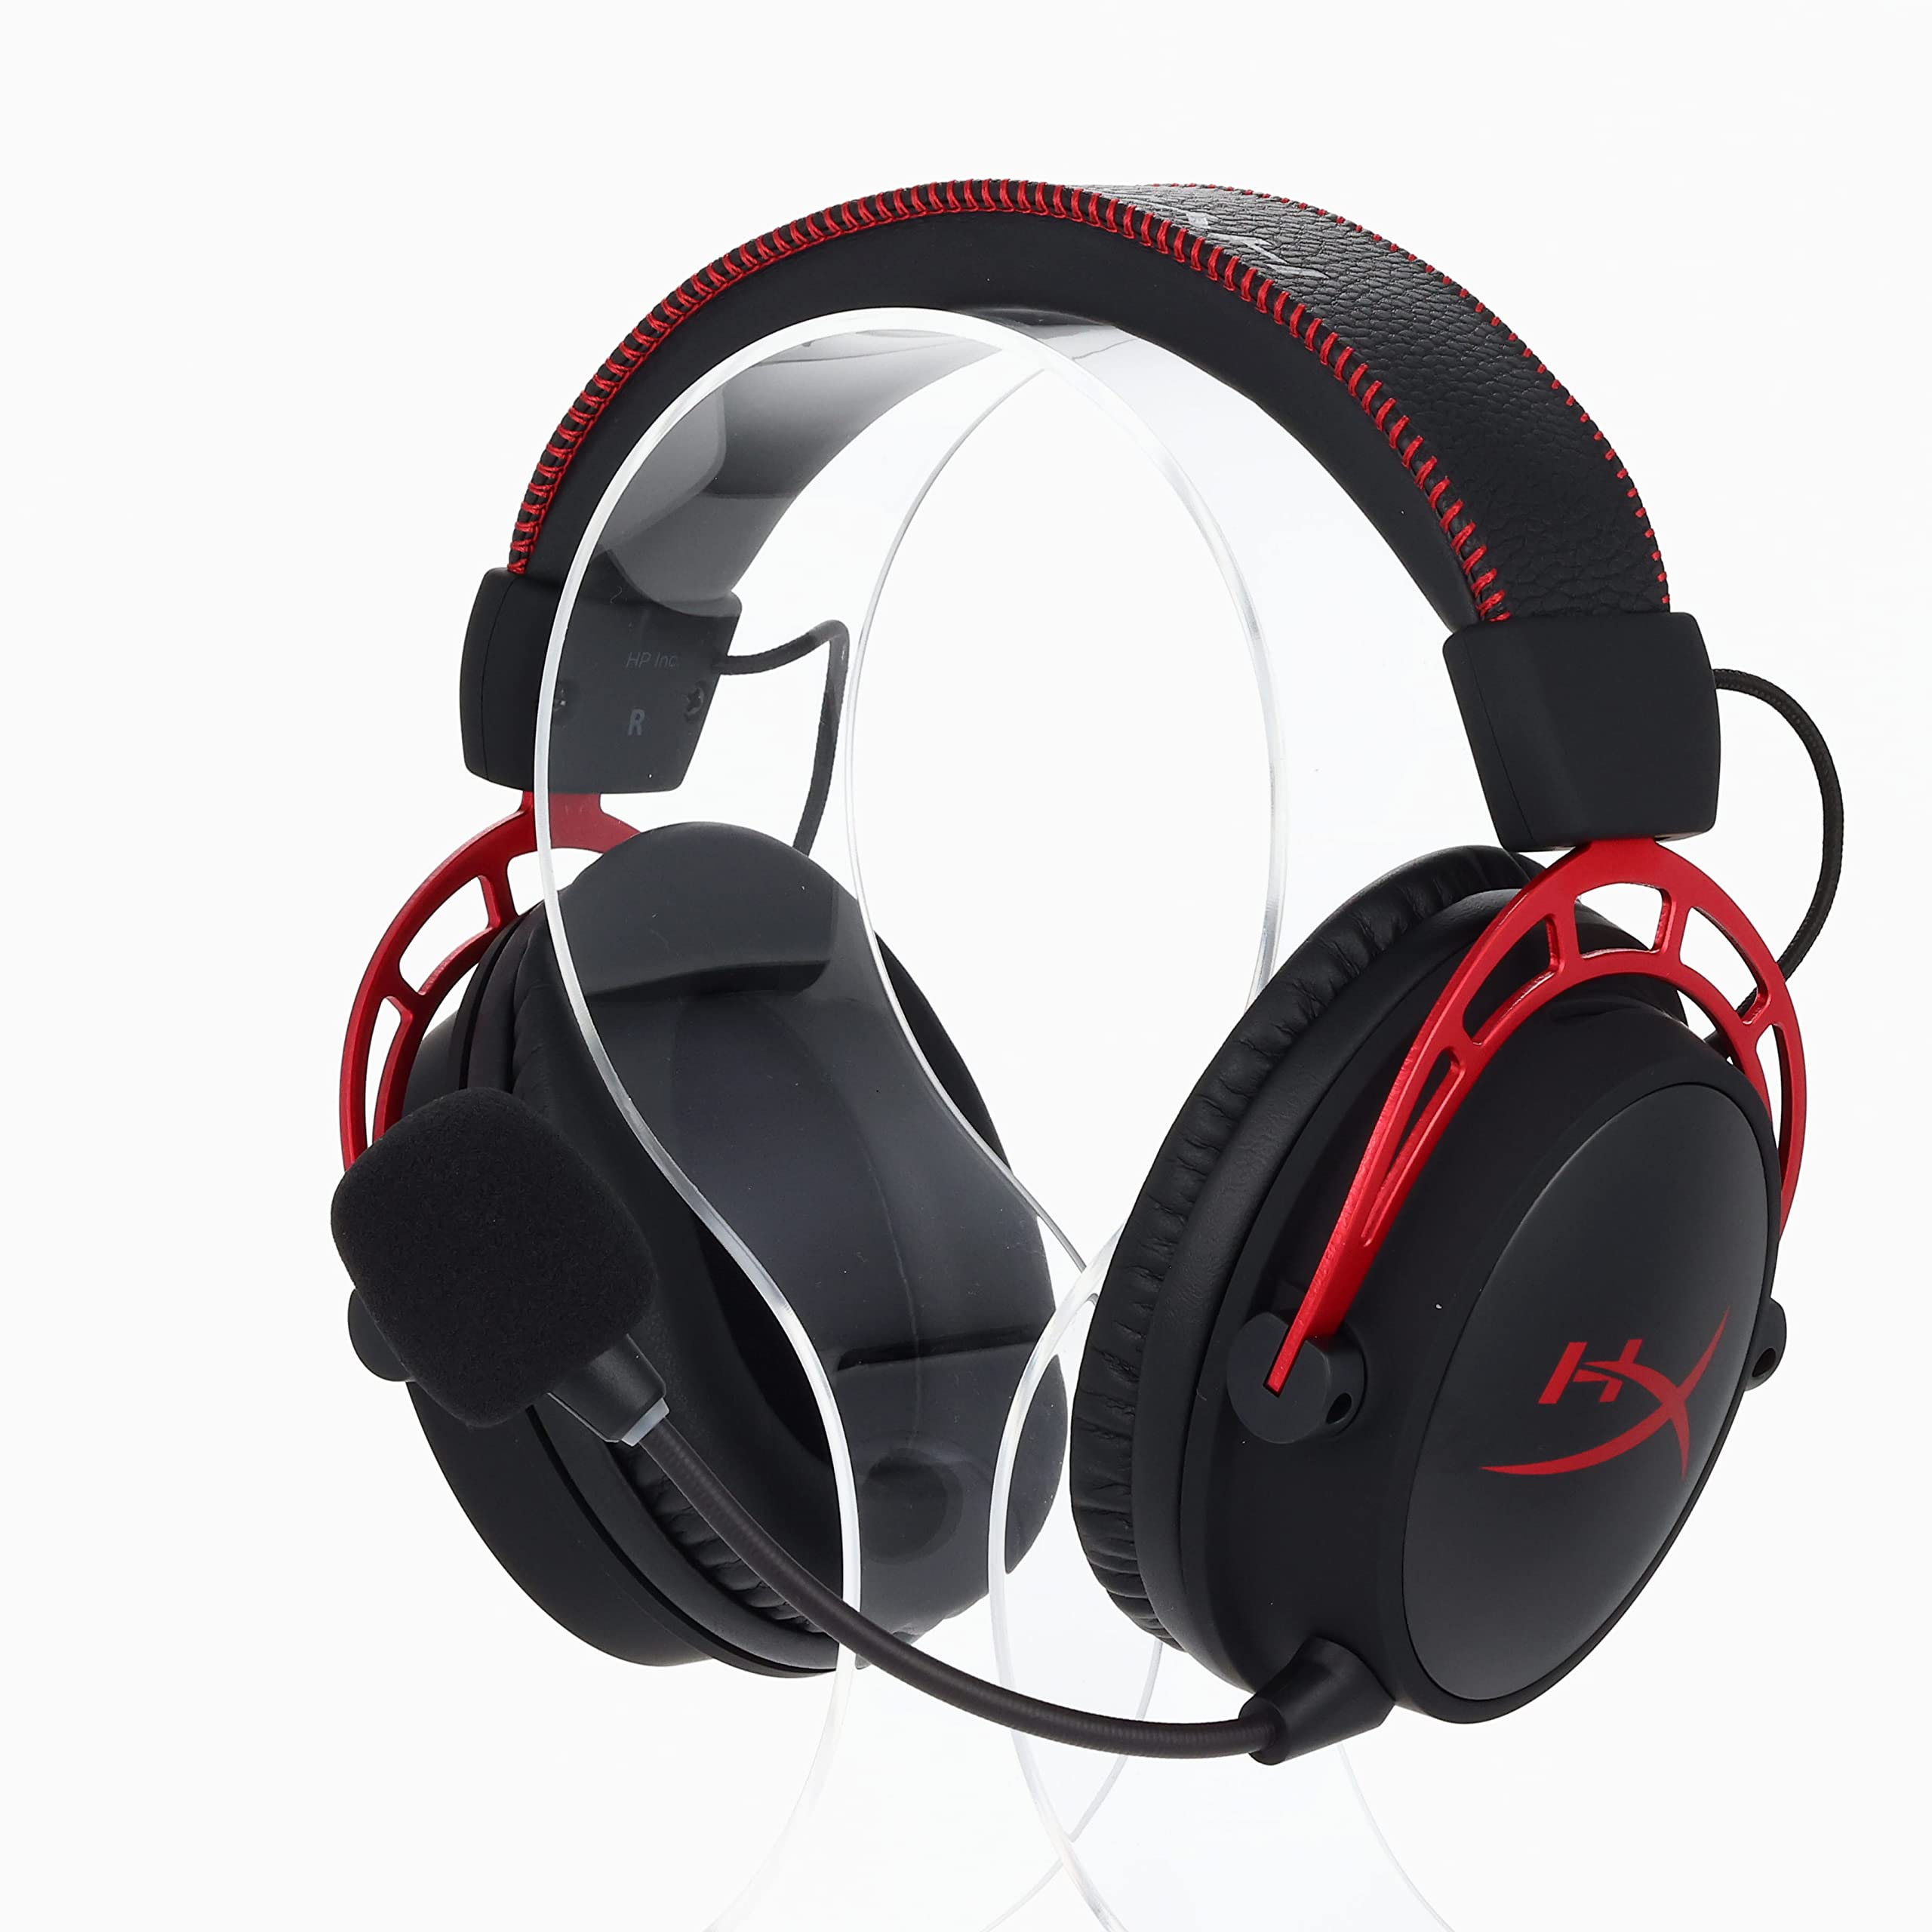 HyperX Cloud Alpha Wireless - Gaming Headset for PC, 300-hour battery life, DTS Headphone:X Spatial Audio, Memory foam, Dual Chamber Drivers, Noise-canceling mic, Durable aluminum frame,Red